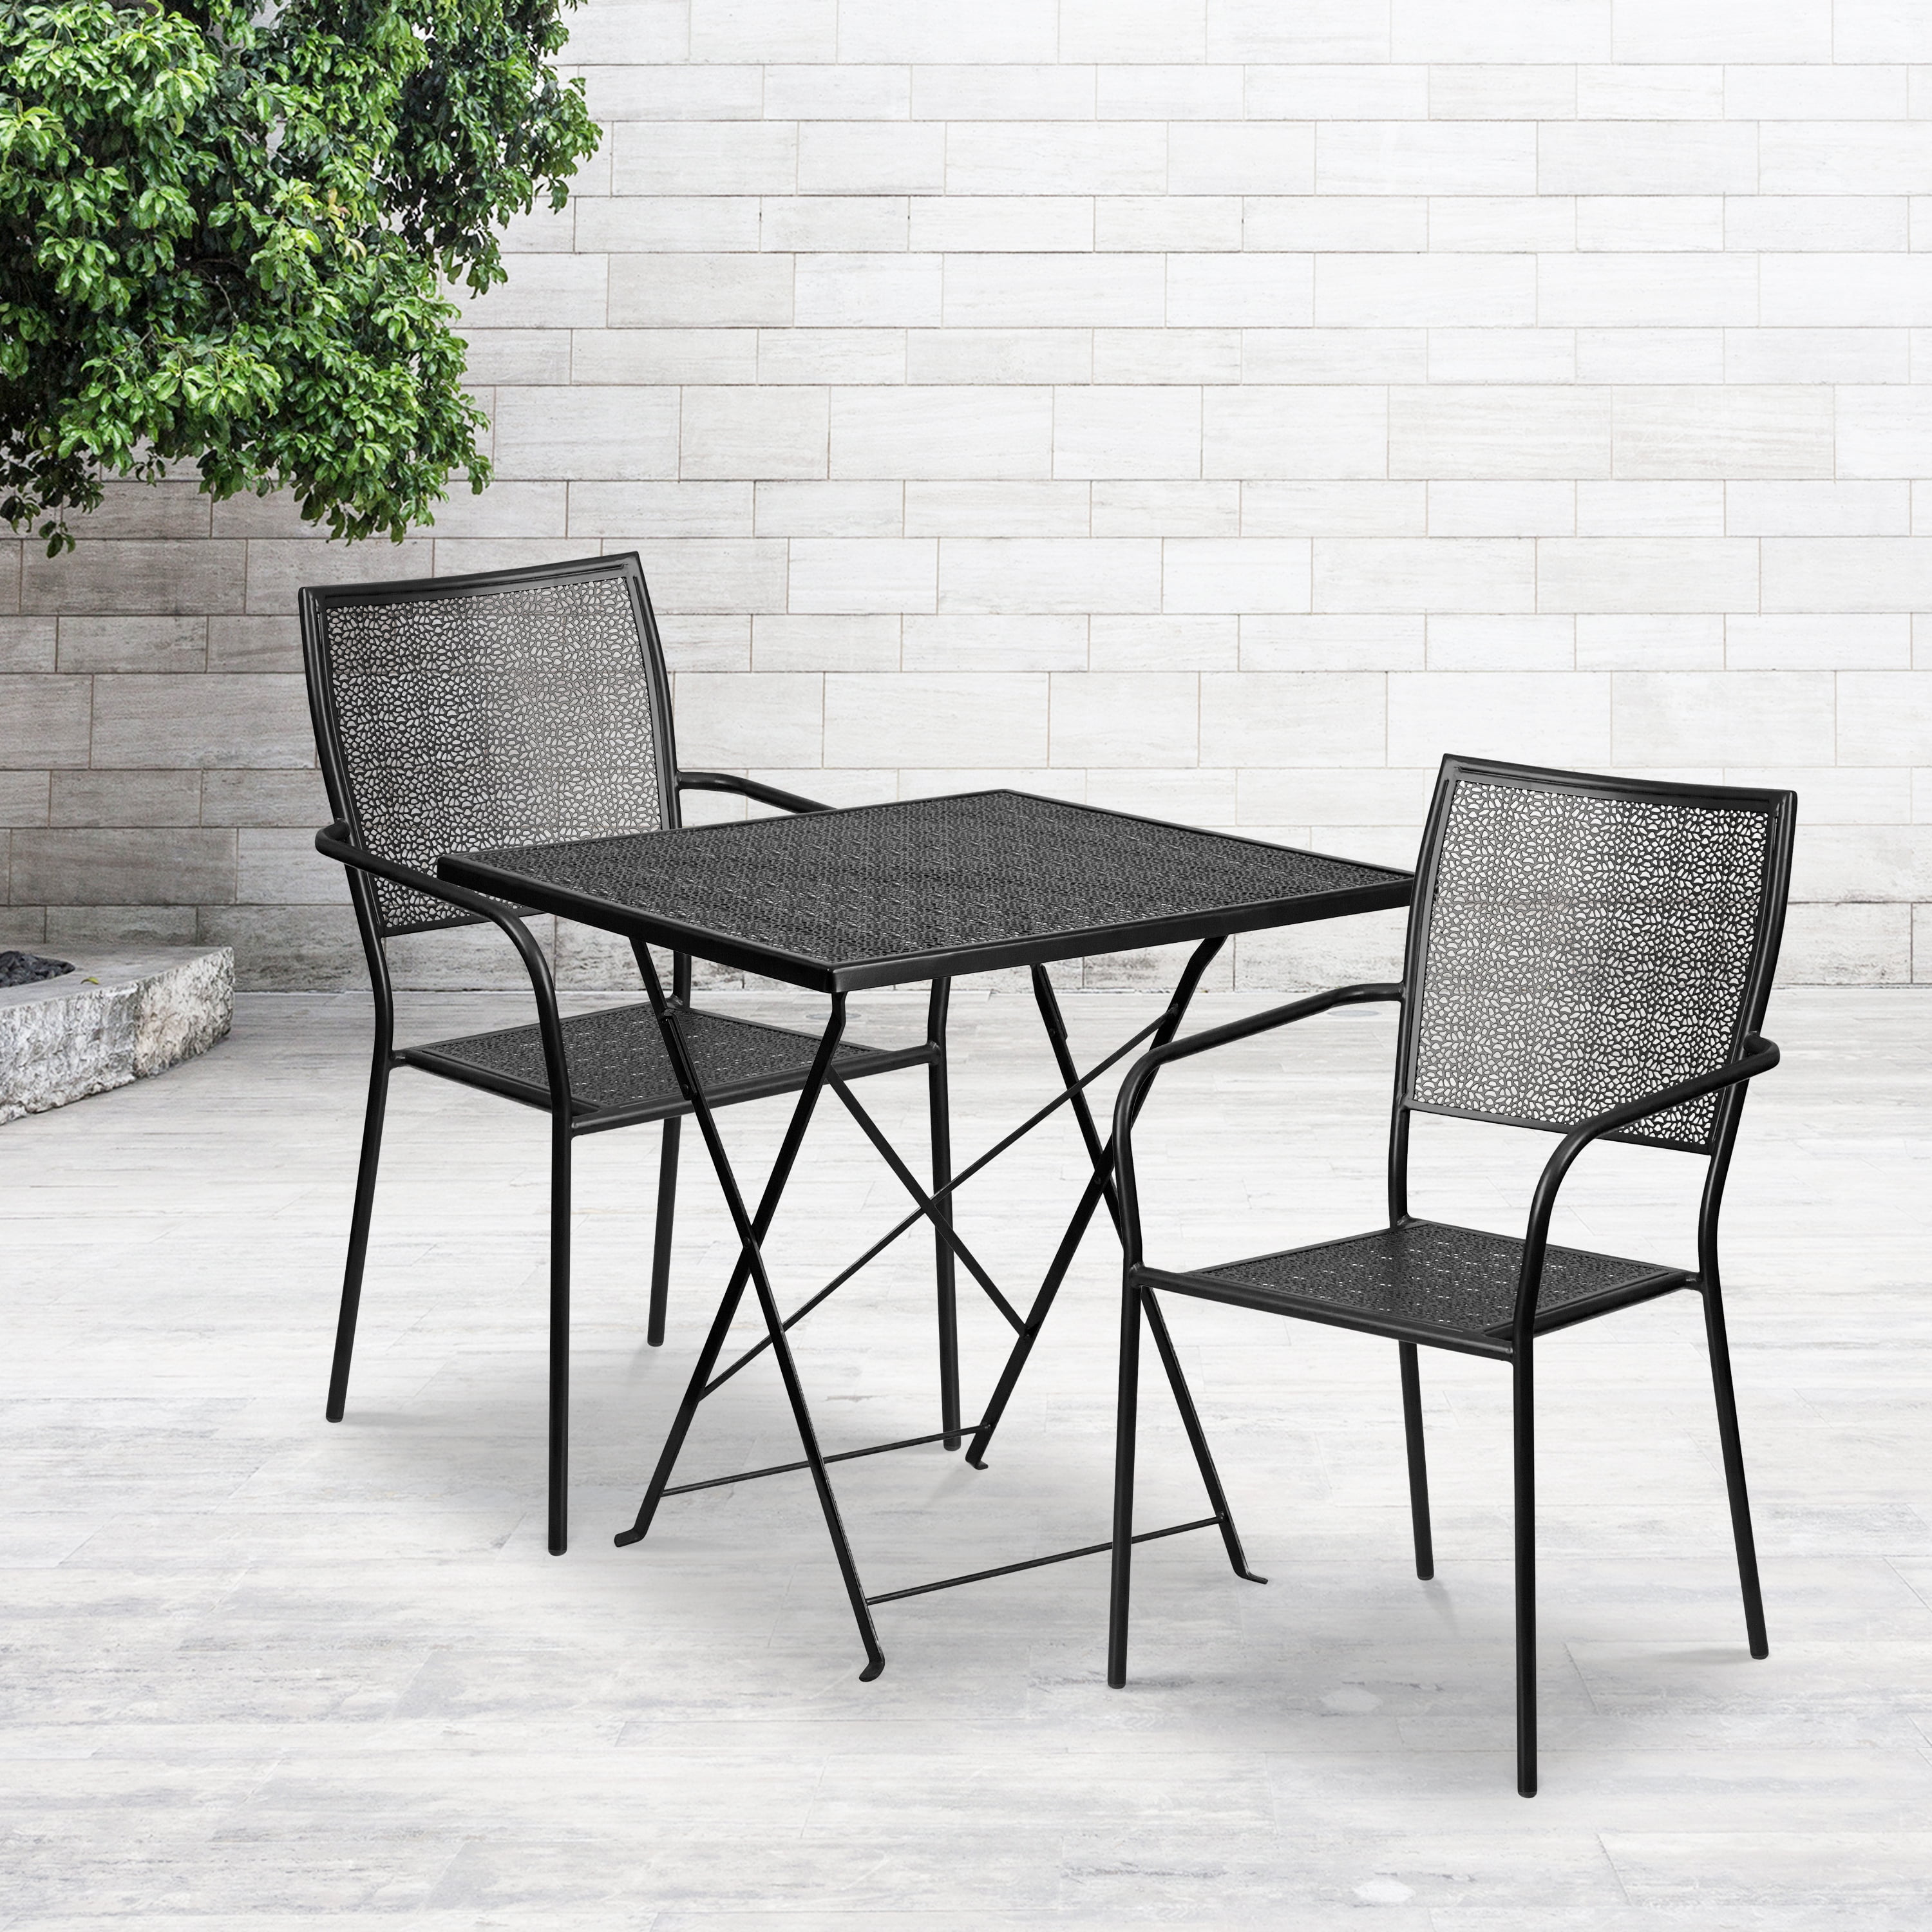 Flash Furniture Oia Commercial Grade 28" Square Black Indoor-Outdoor Steel Folding Patio Table Set with 2 Square Back Chairs - image 2 of 5